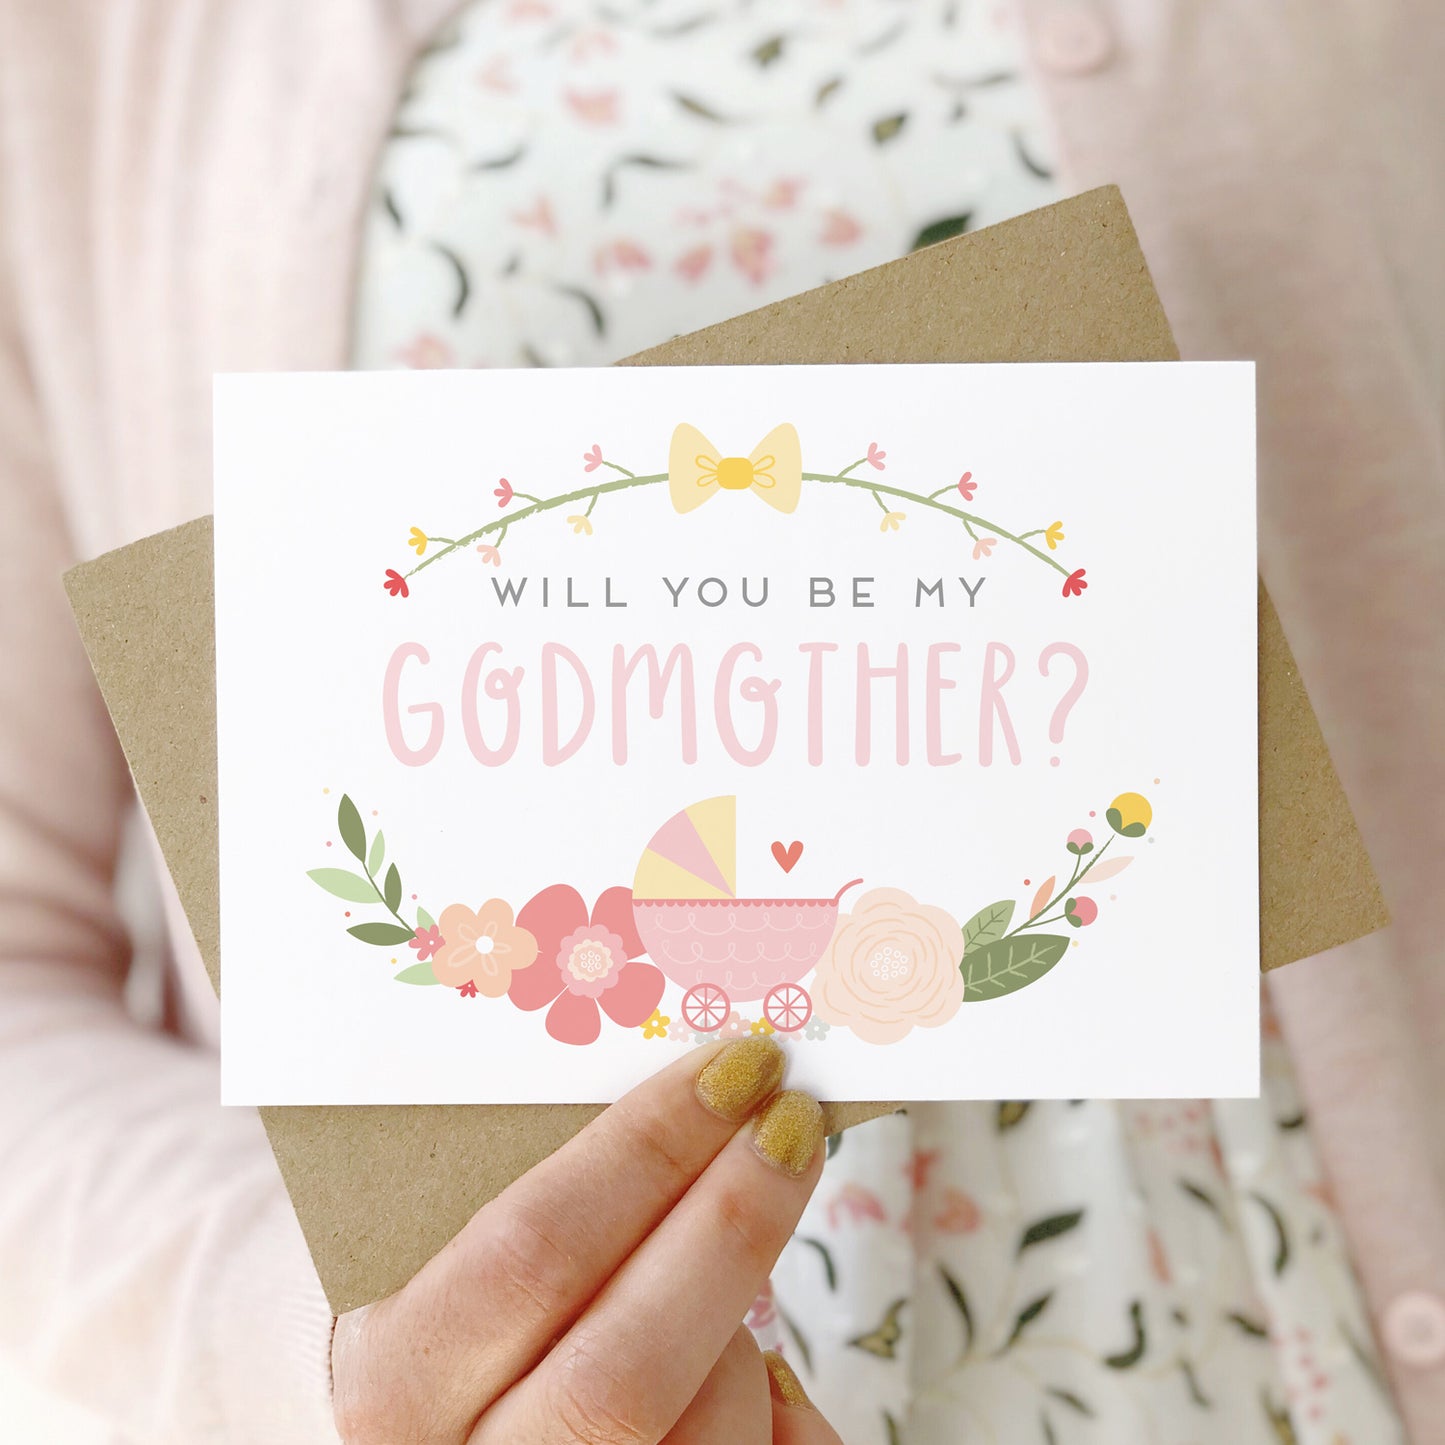 A will you be my godmother card being held in front of a white dress and pink cardigan. The design features a pram, simple florals and the all important question. This is the pink palette.